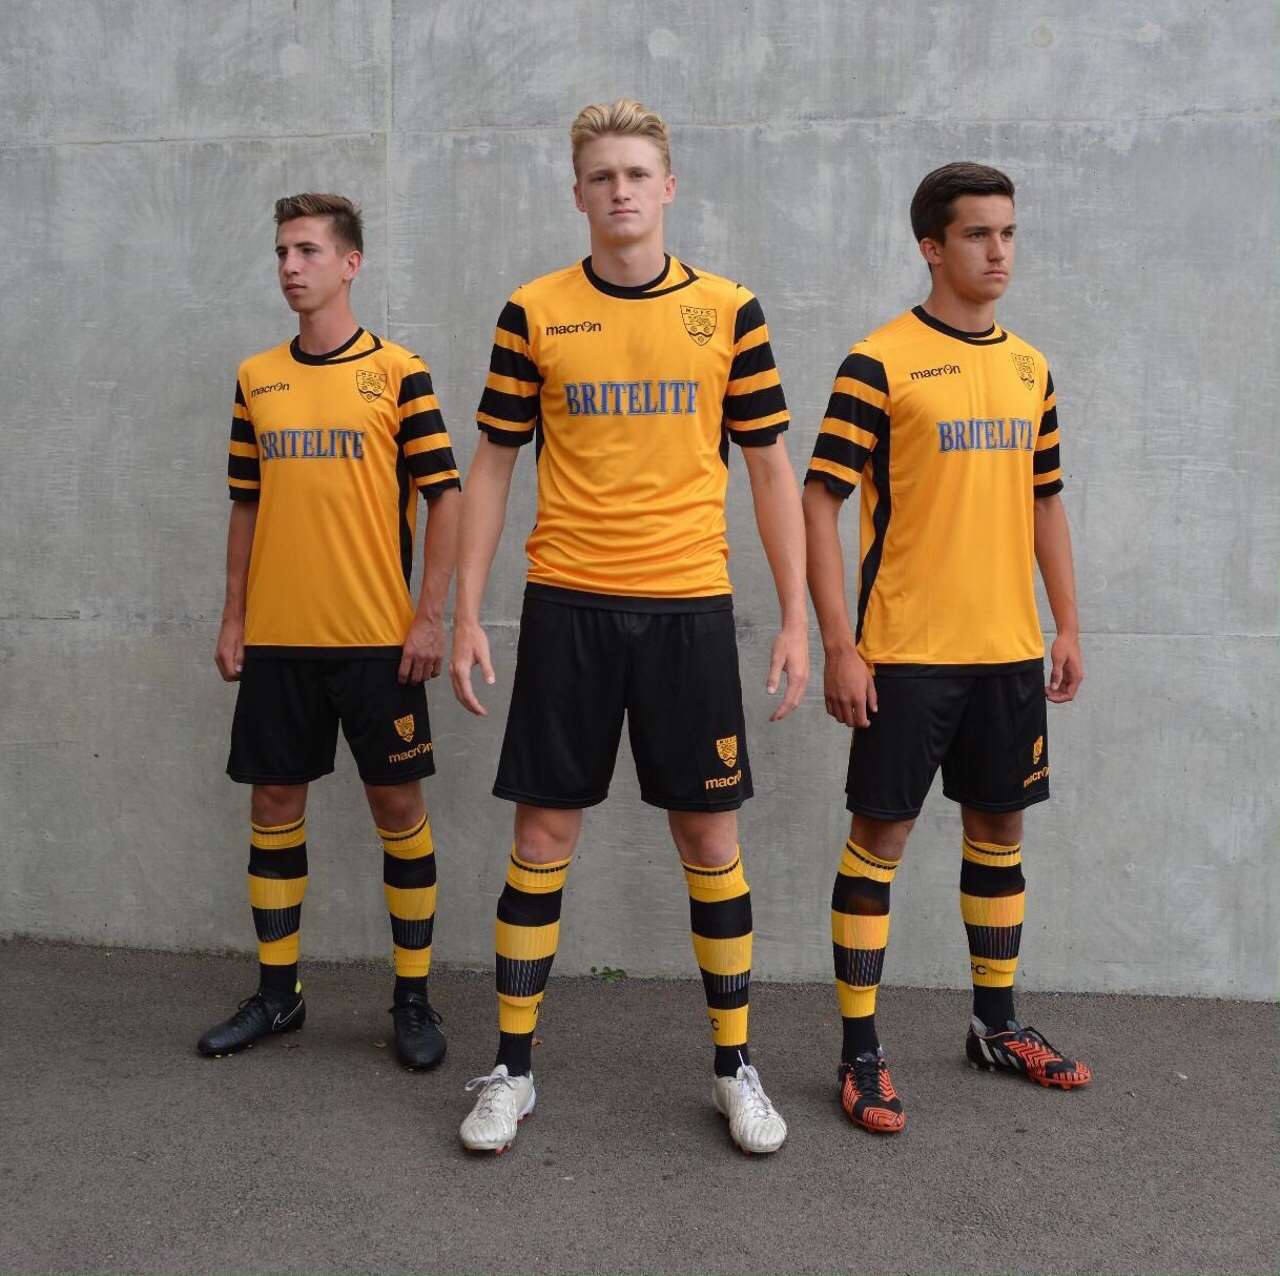 Academy players Tom Mackelden, Harris Rodgers and Will Thomas model Maidstone United's new kit Picture: Ian Tucker